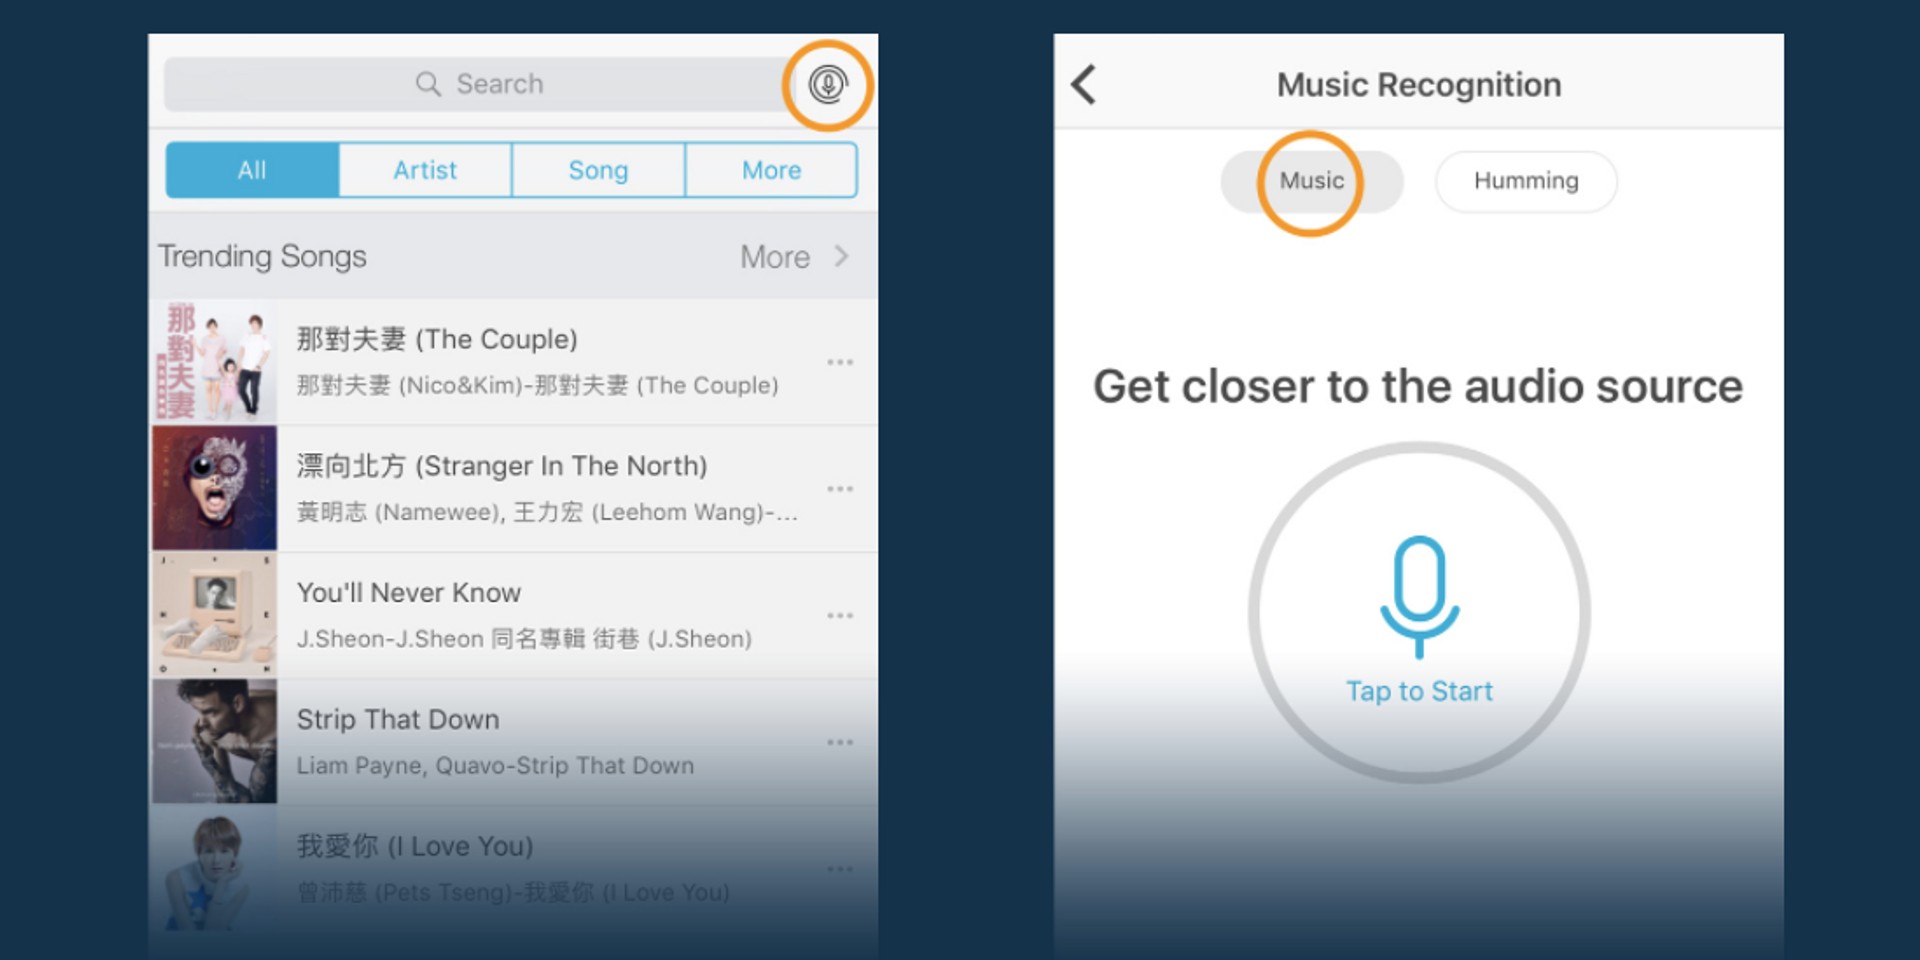 KKBOX launches their own music recognition feature on app